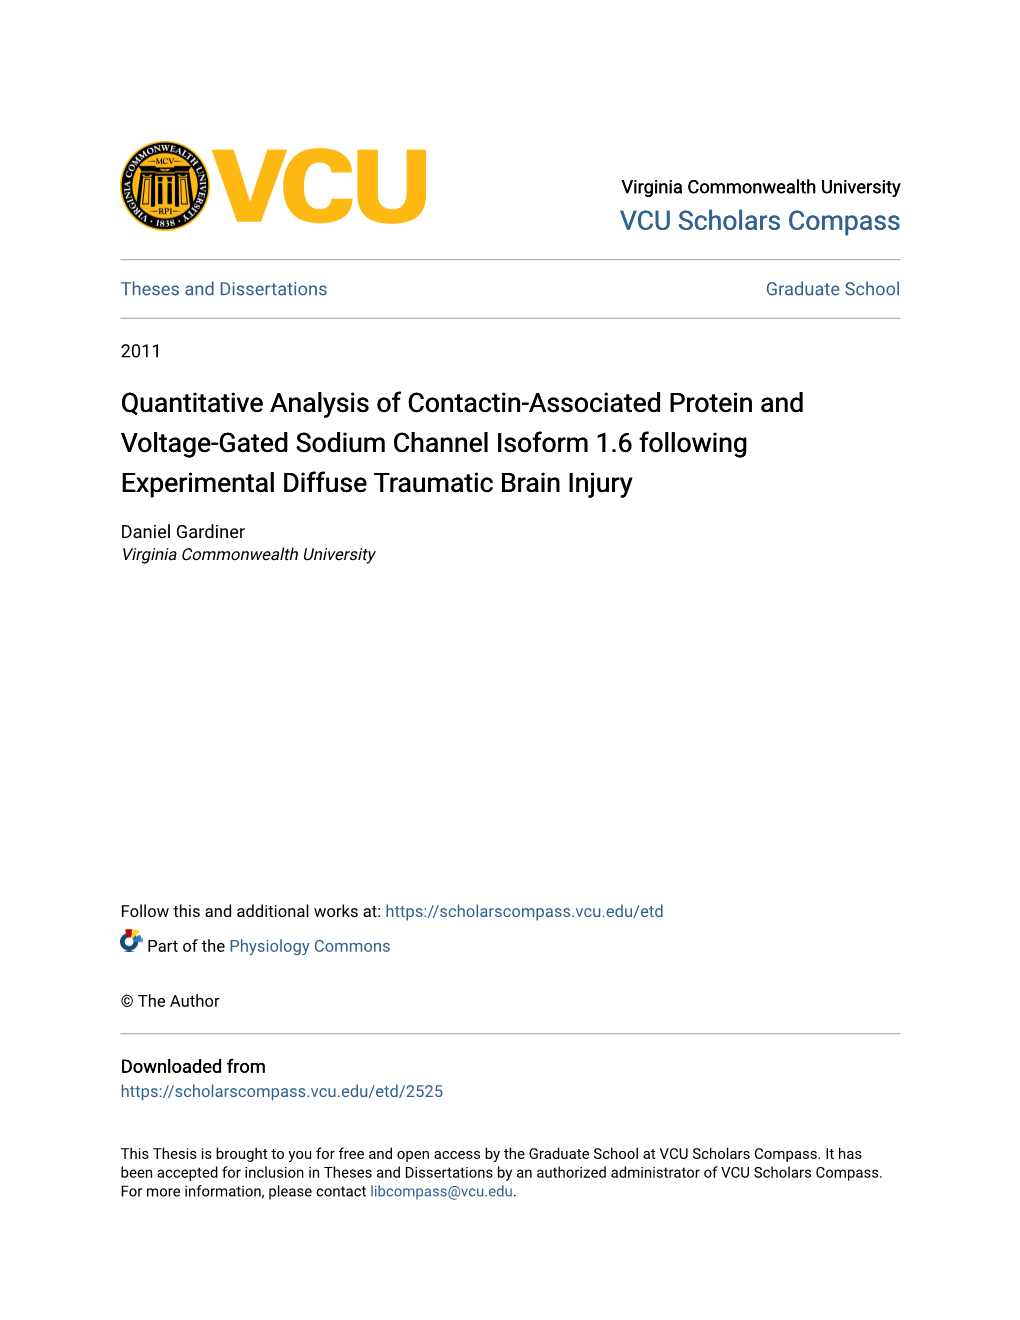 Quantitative Analysis of Contactin-Associated Protein and Voltage-Gated Sodium Channel Isoform 1.6 Following Experimental Diffuse Traumatic Brain Injury